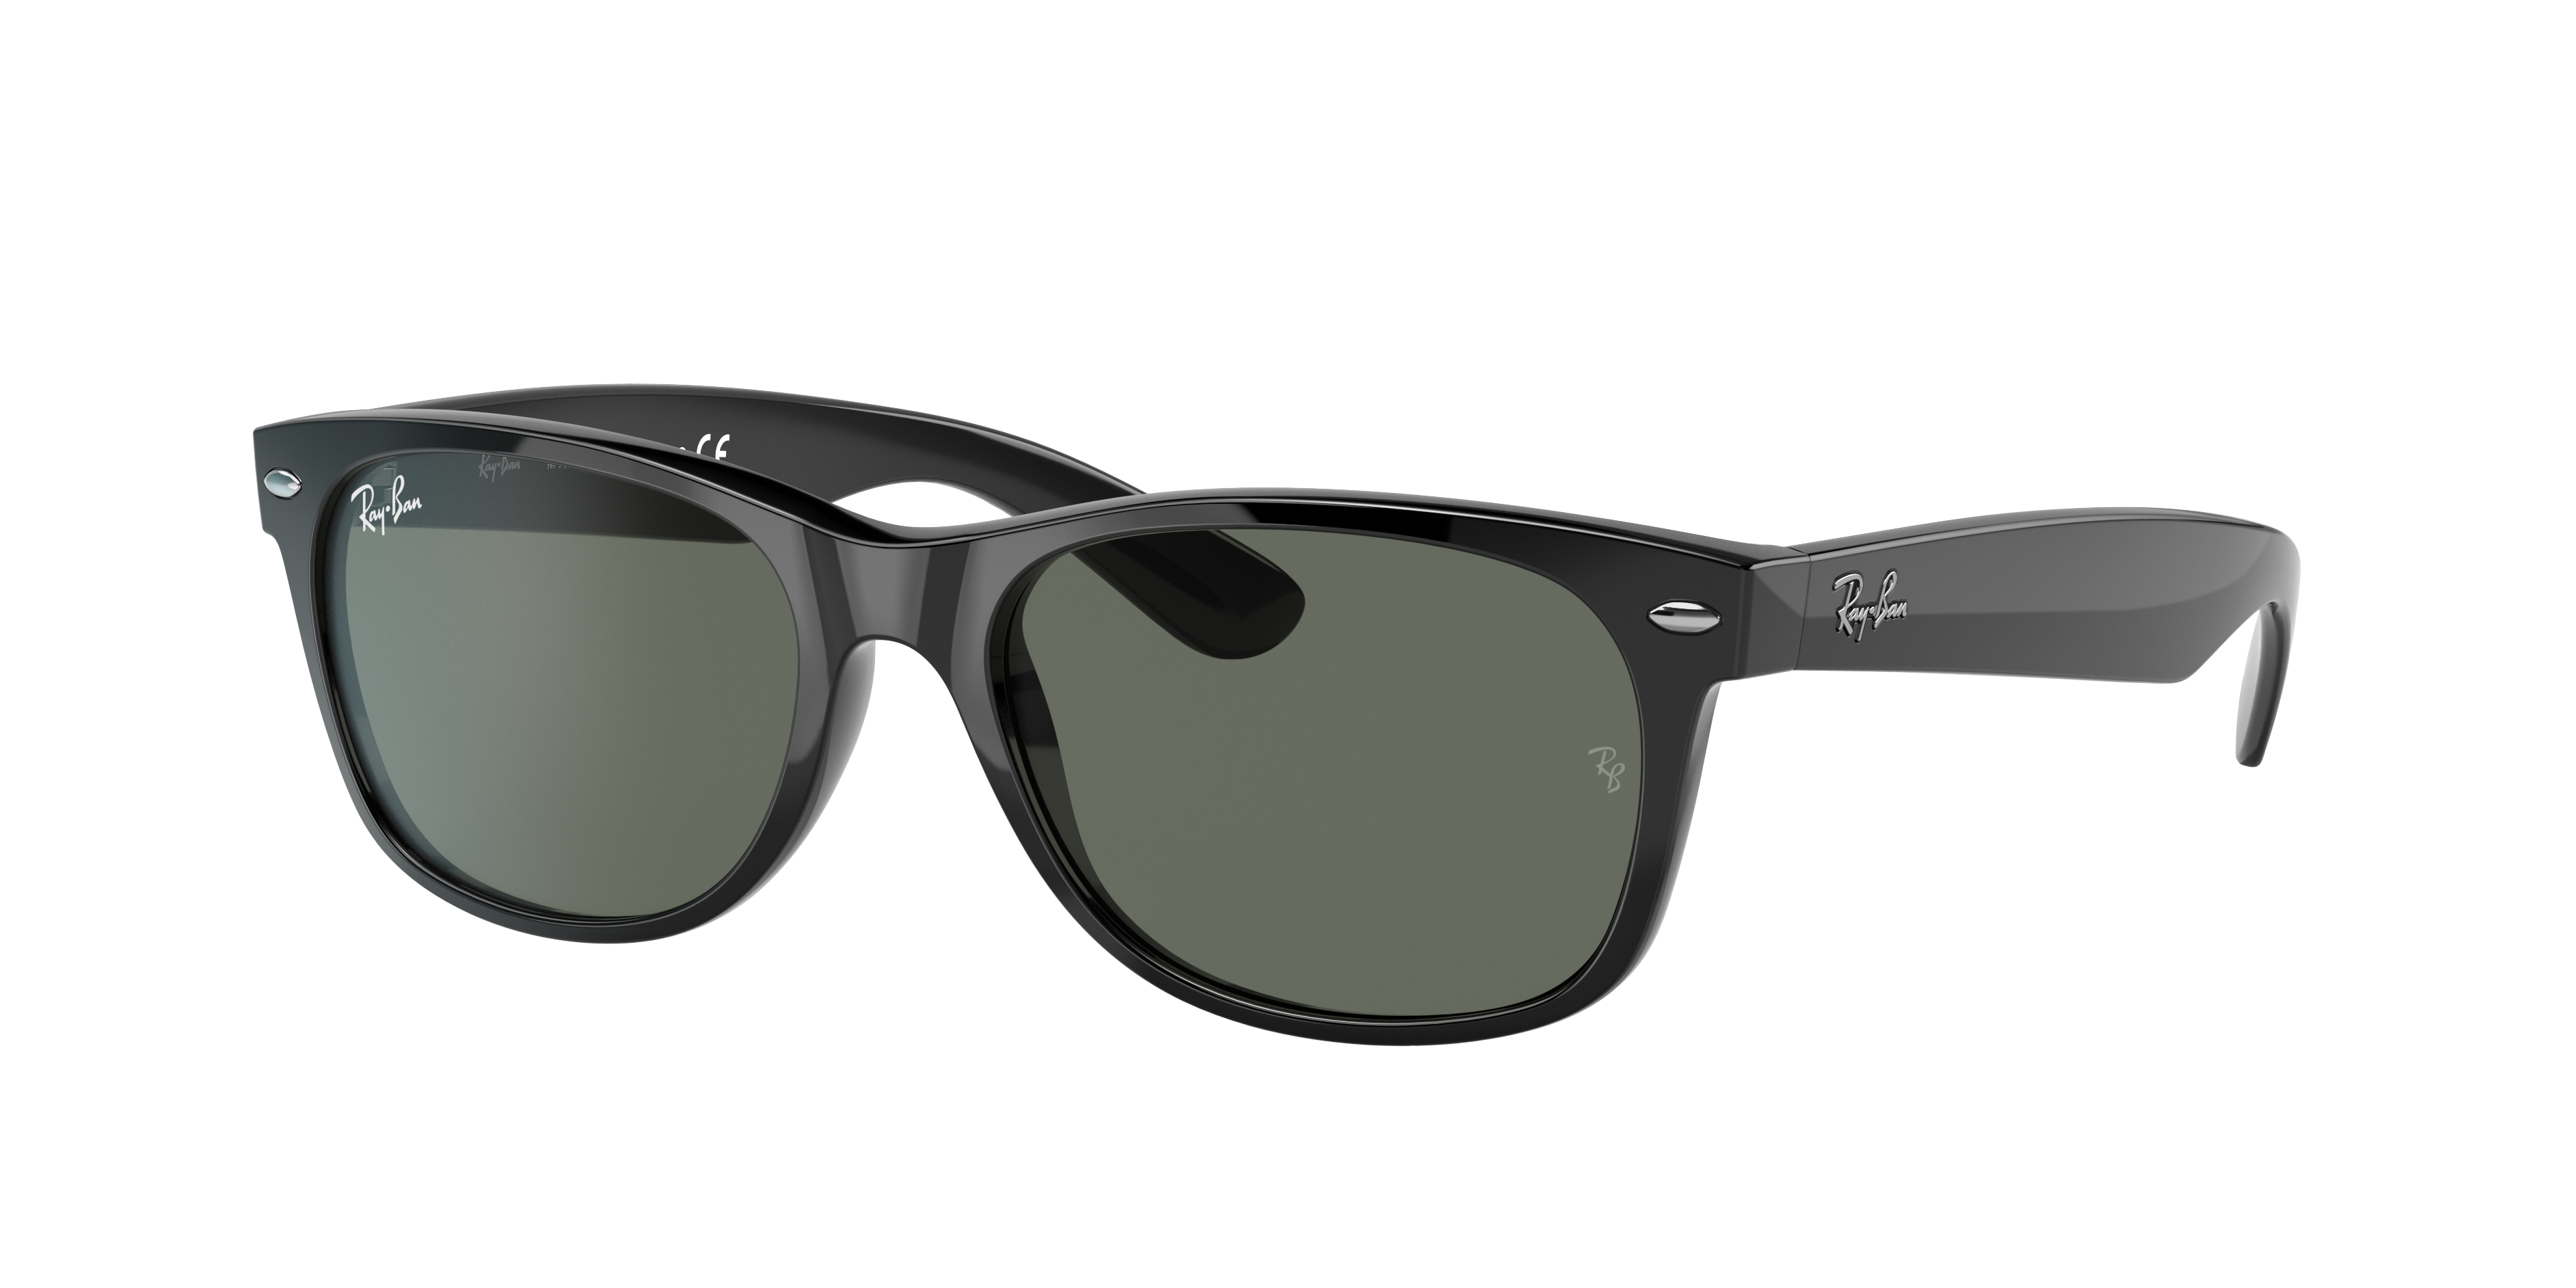 what is the largest wayfarer size